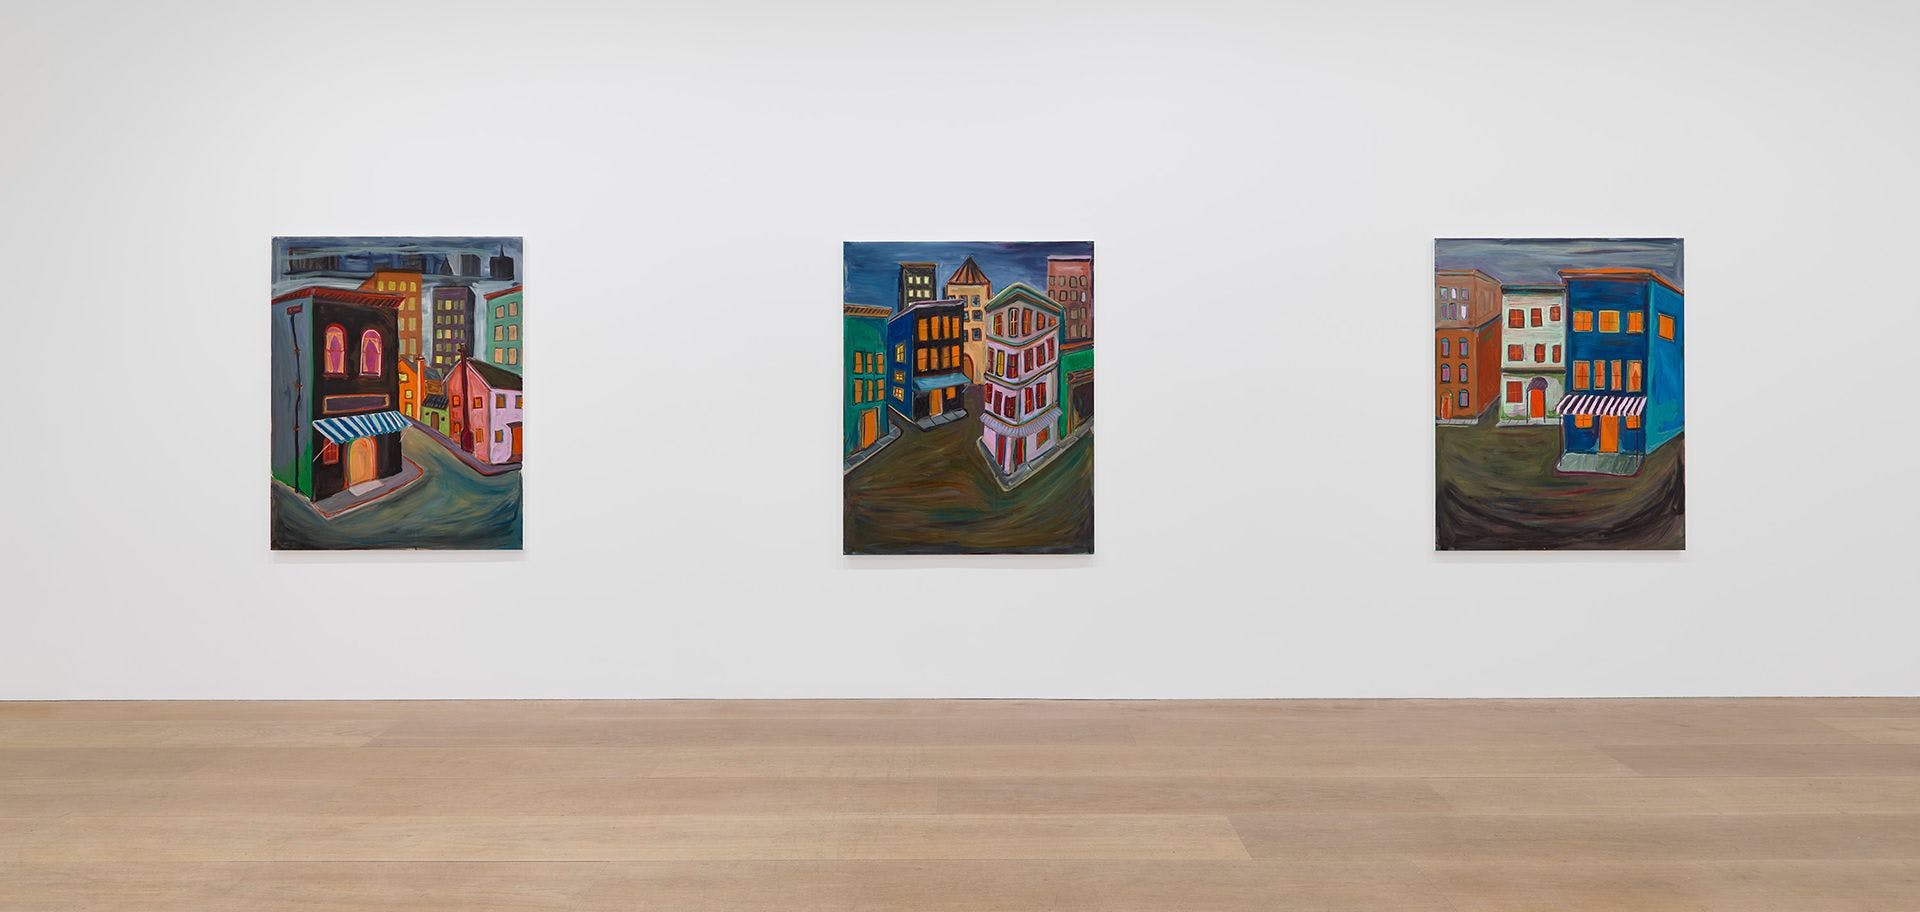 An installation of paintings by Josh Smith dated 2020